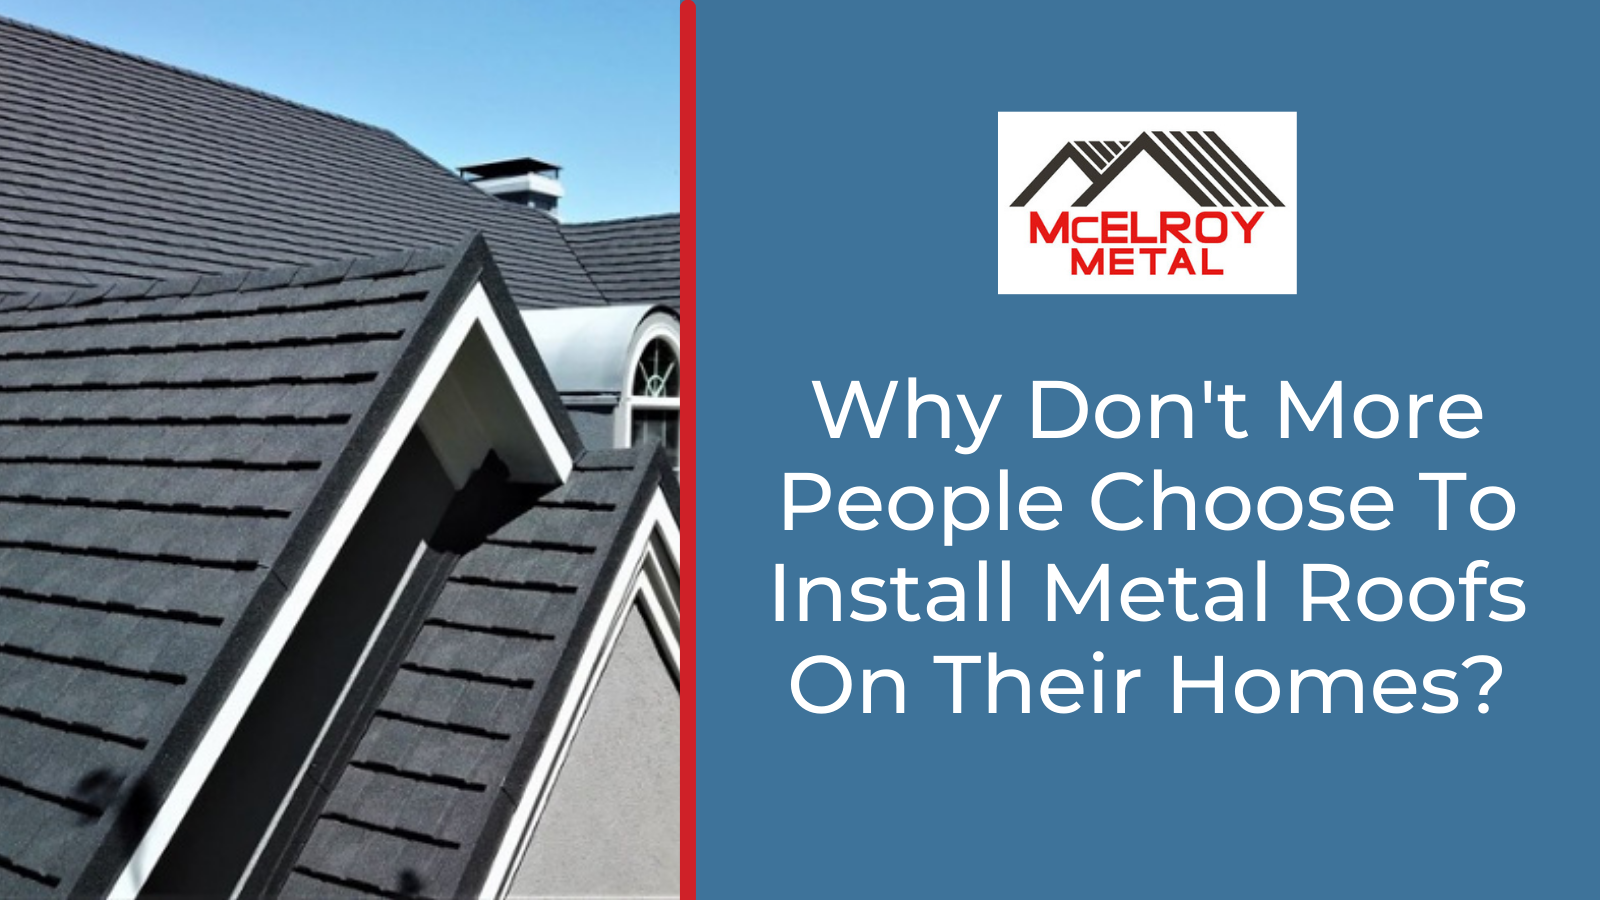 Why Don't More People Choose To Install Metal Roofs On Their Homes?